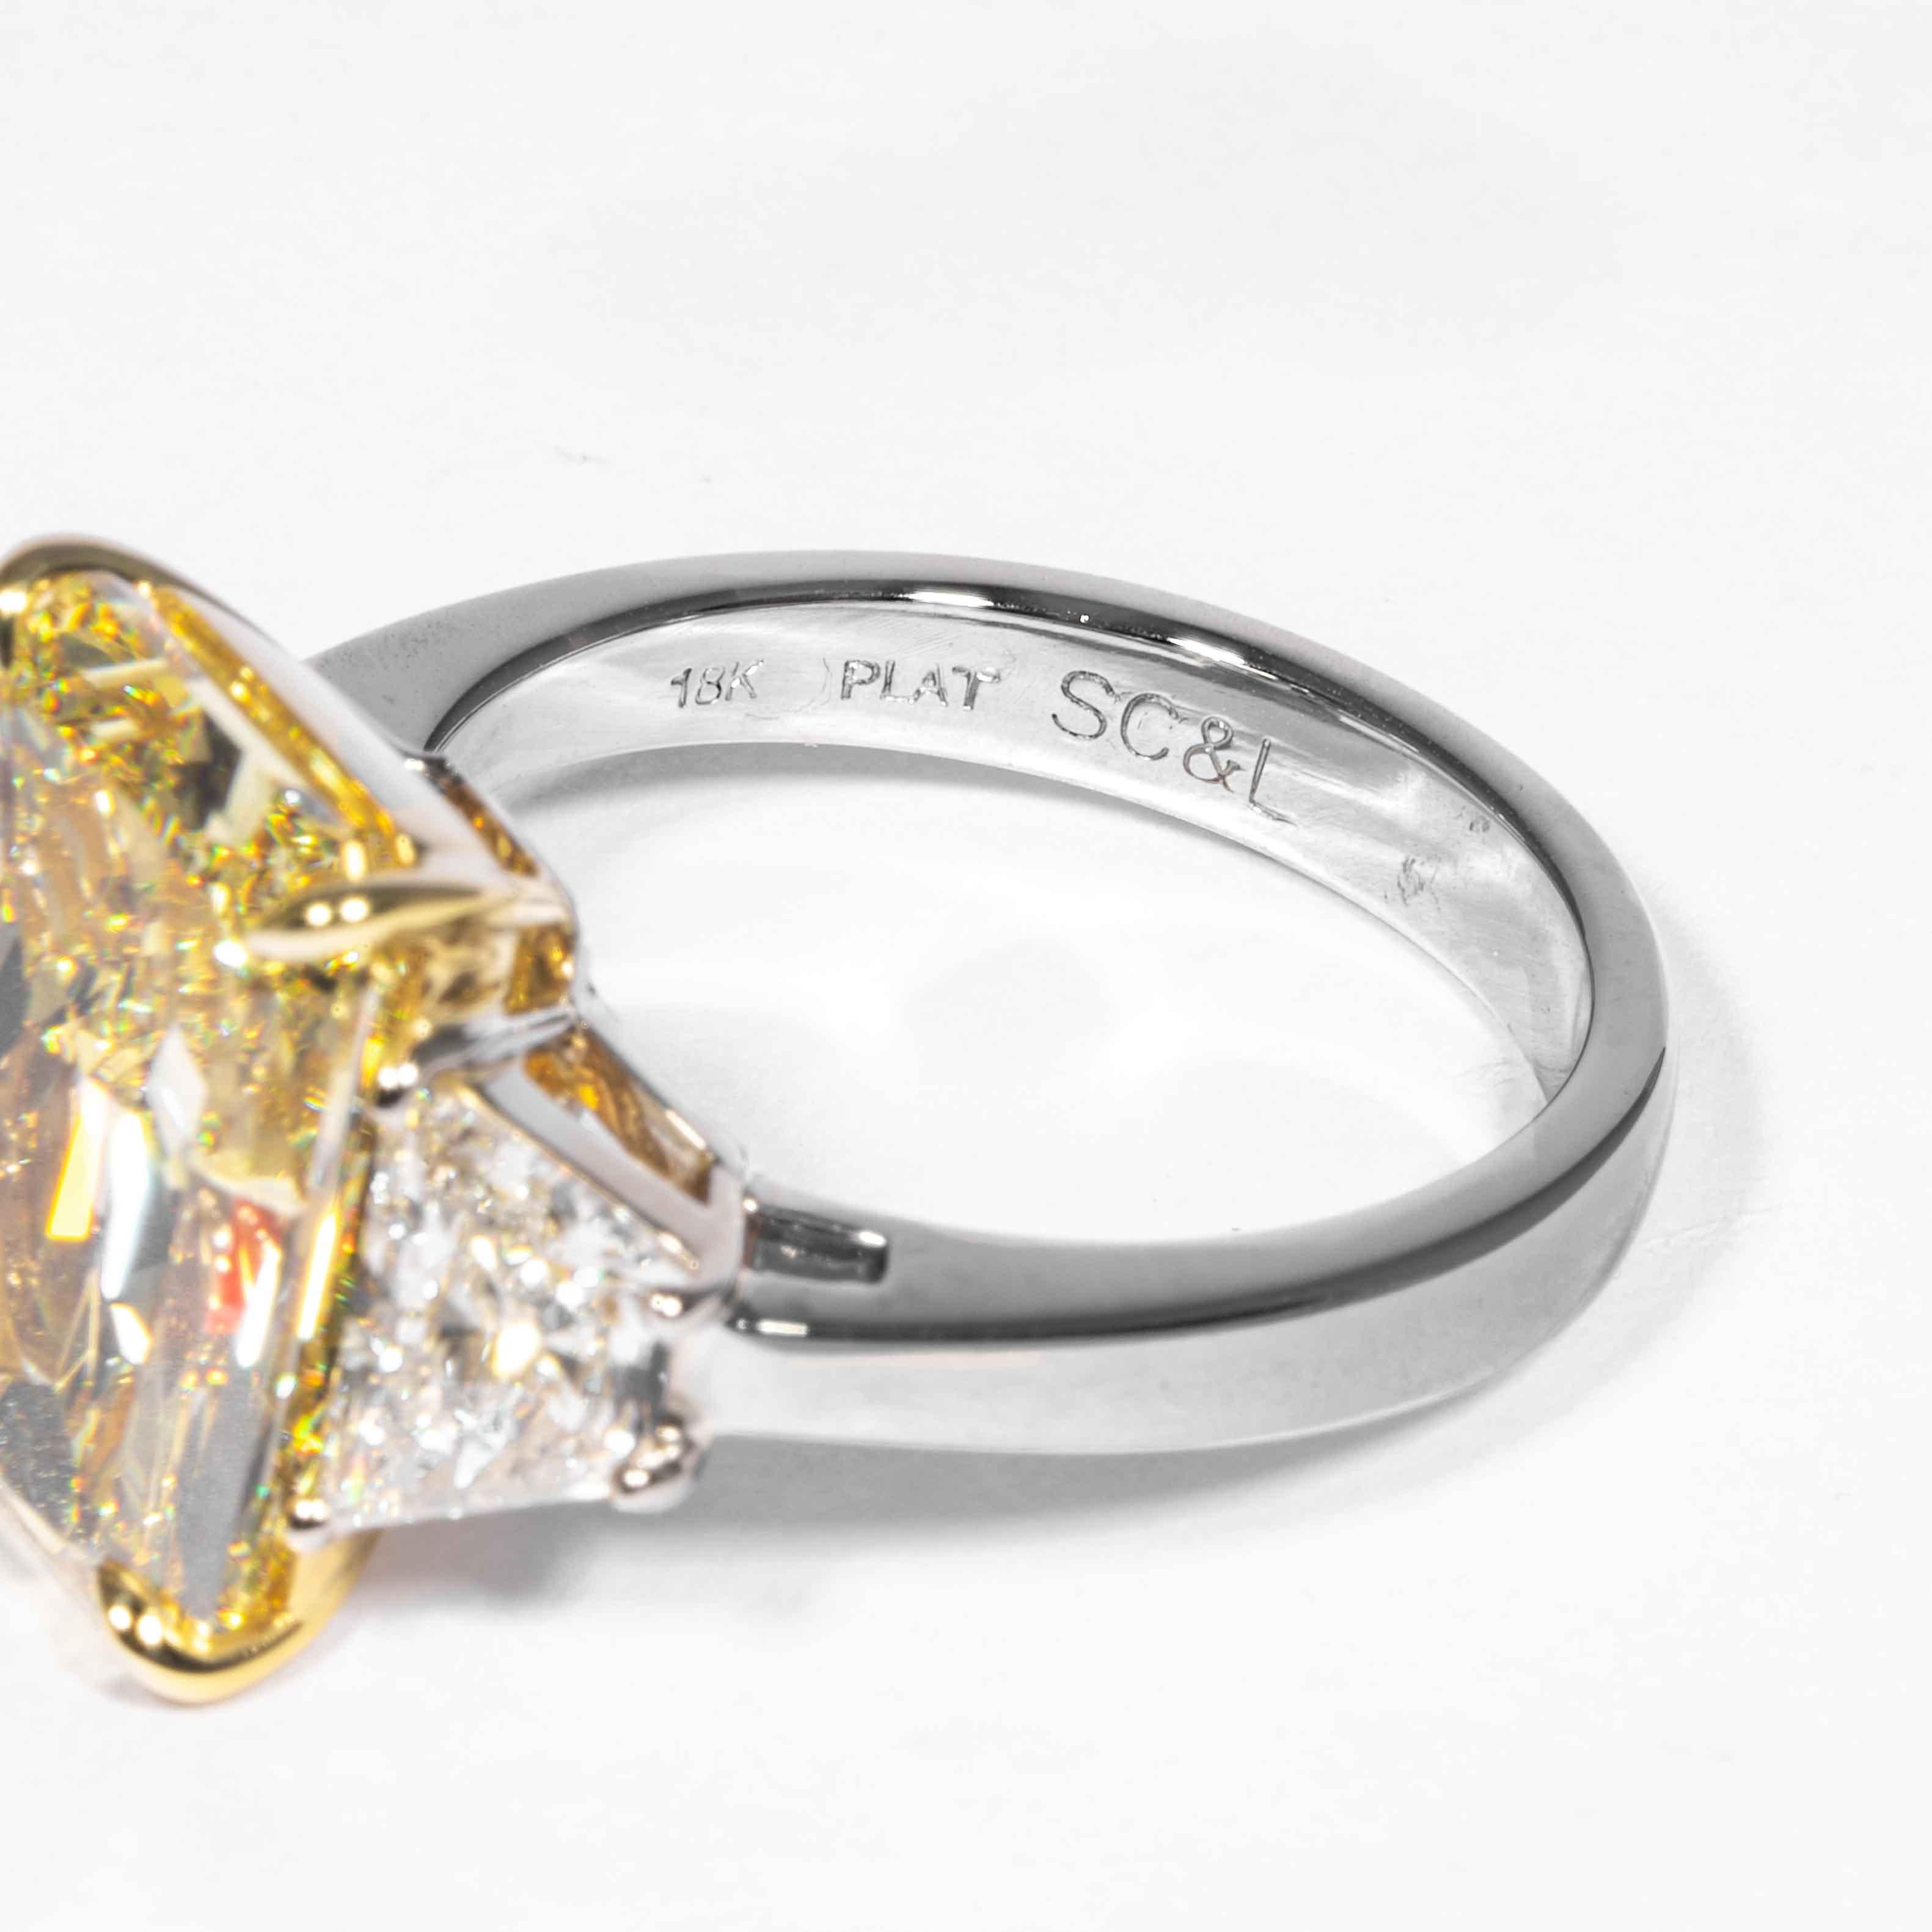 Shreve, Crump & Low GIA Certified 7.95 Carat Fancy Yellow Radiant Diamond Ring In New Condition For Sale In Boston, MA